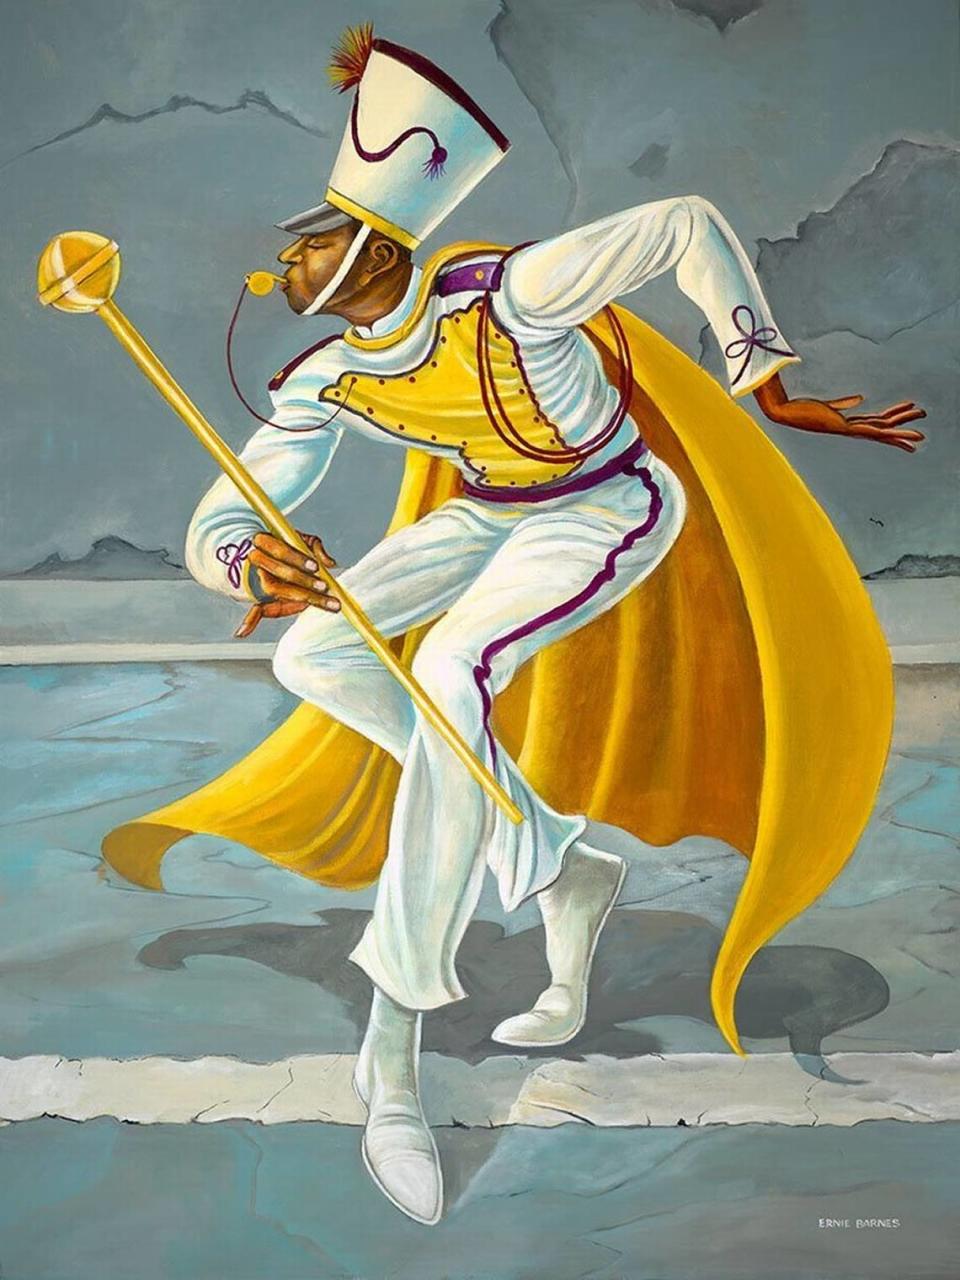 “The Drum Major” by Ernie Barnes, 2003, will be included in “The North Carolina Roots of Artist Ernie Barnes” exhibition at the North Carolina Museum of History, which opens June 29 and runs through March 3.